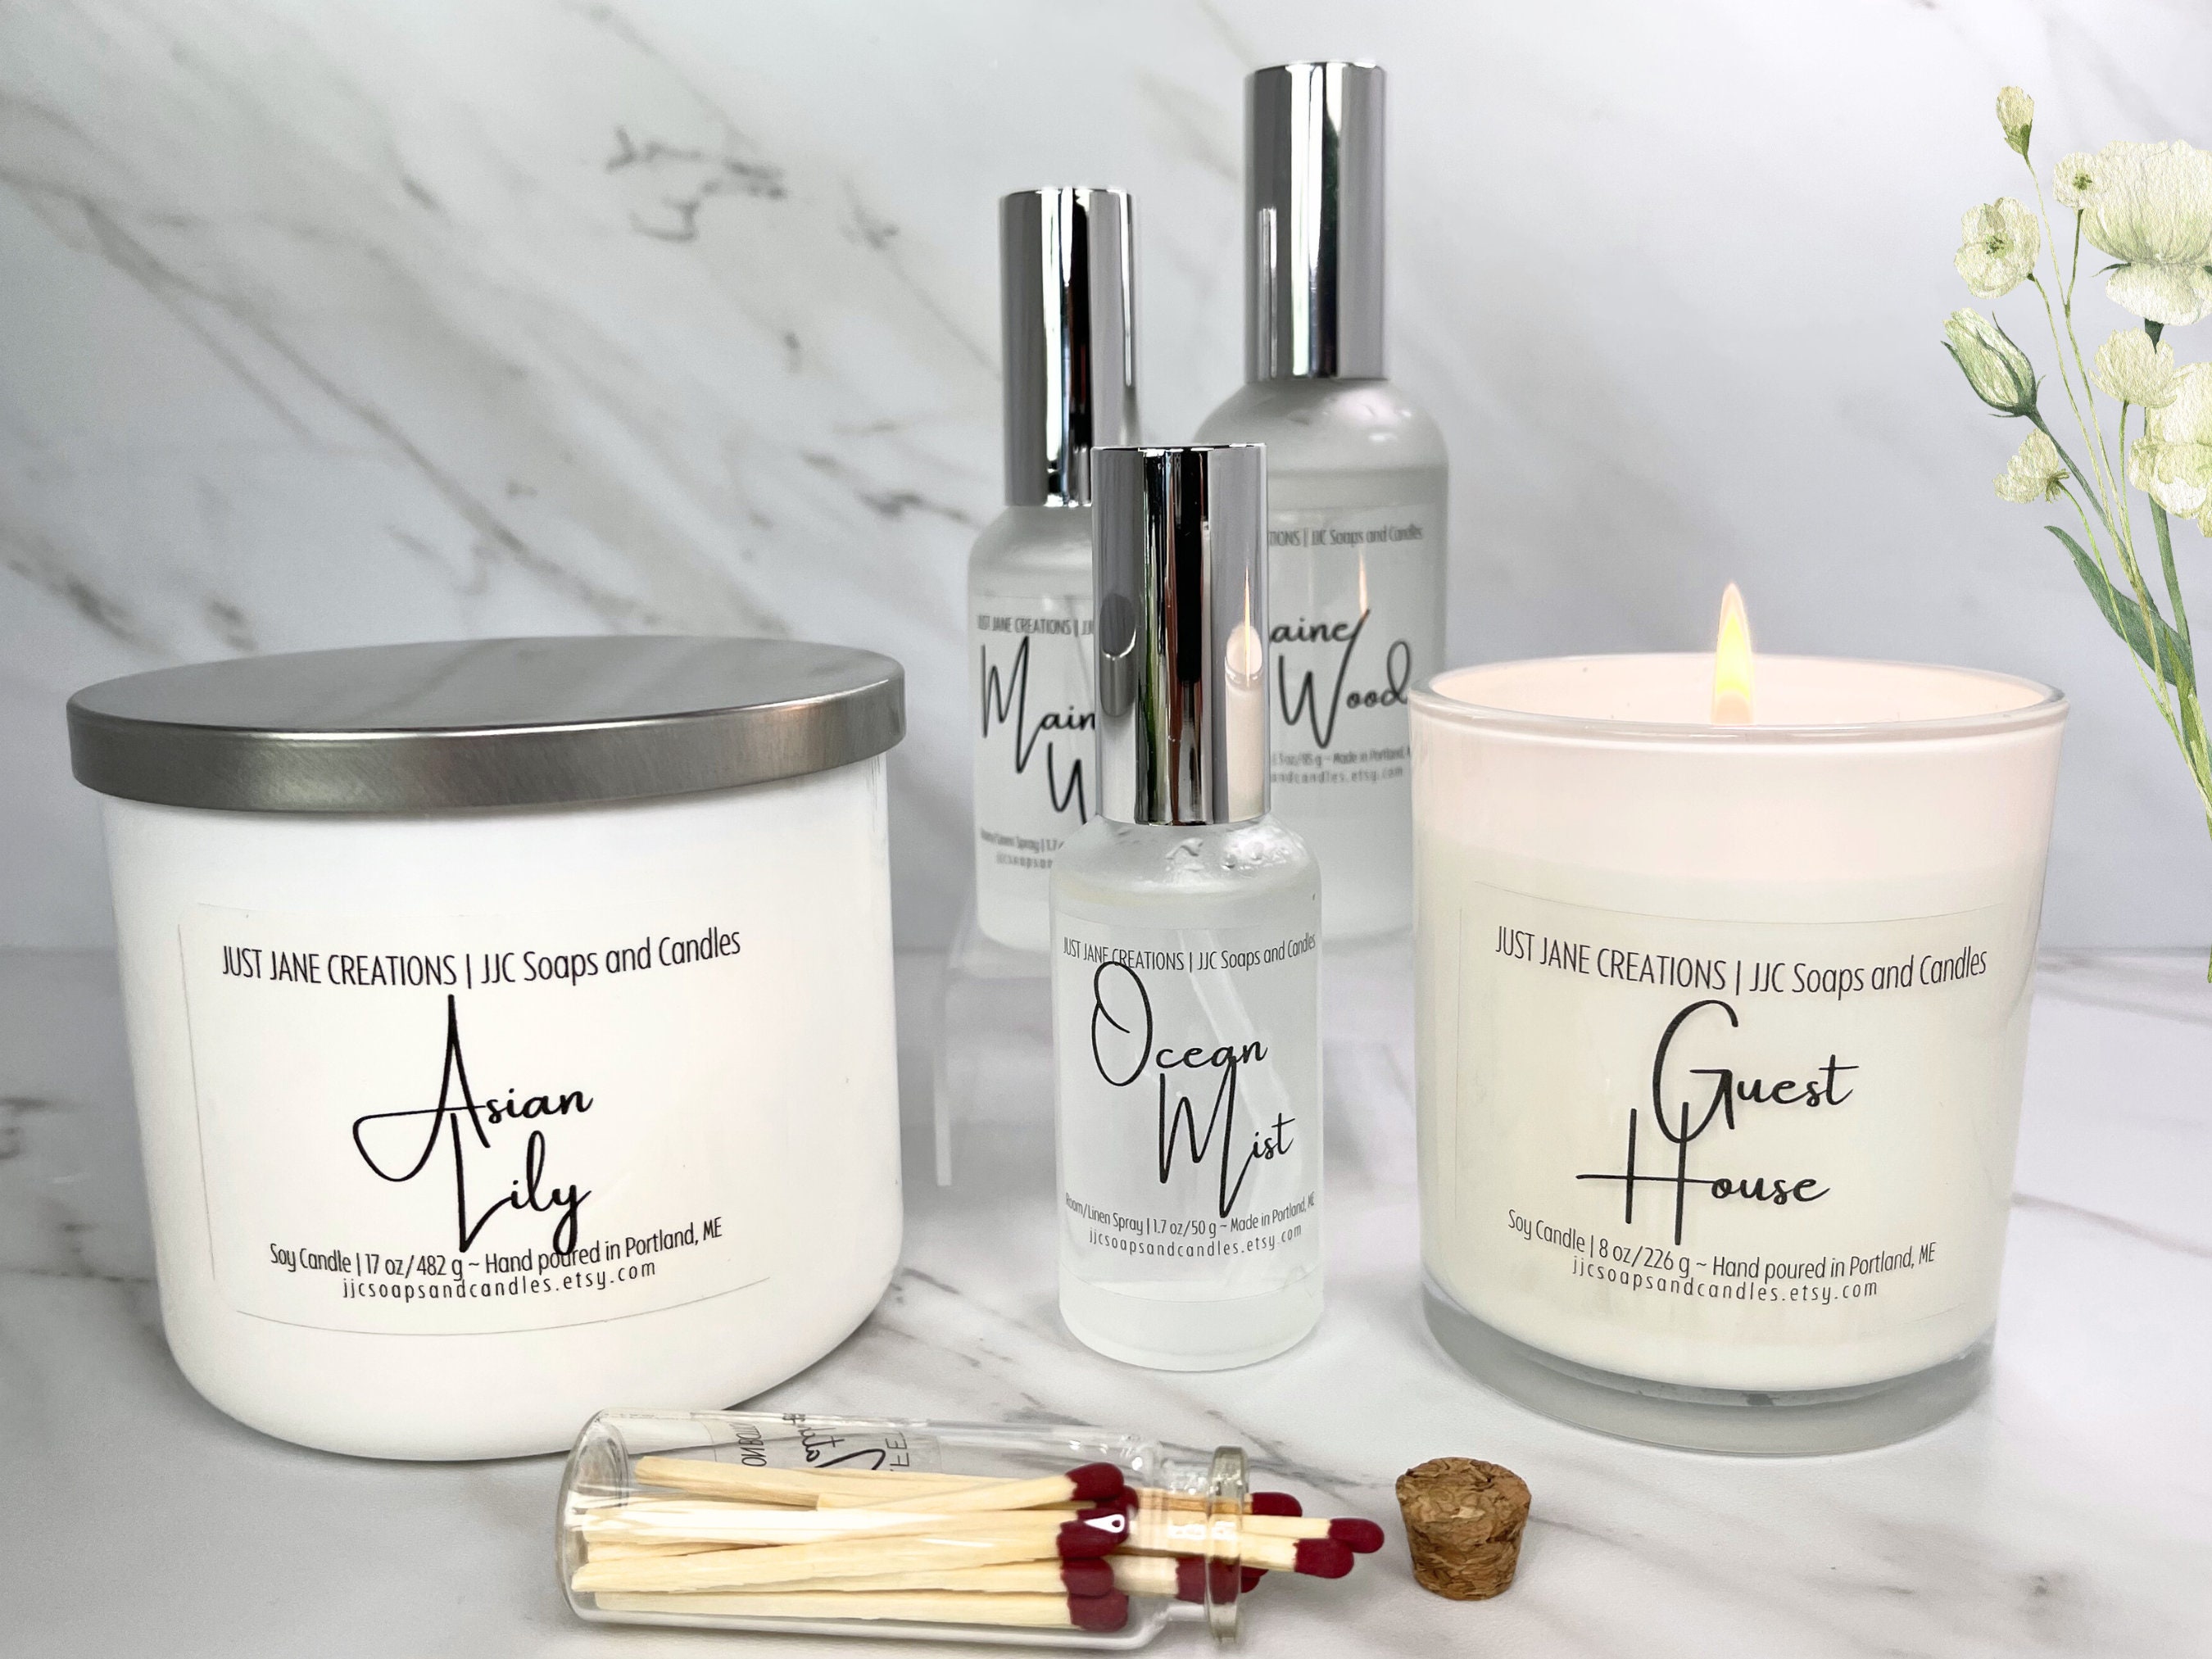 Clean Linen Aromatherapy: Refresh Your Space with Invigorating